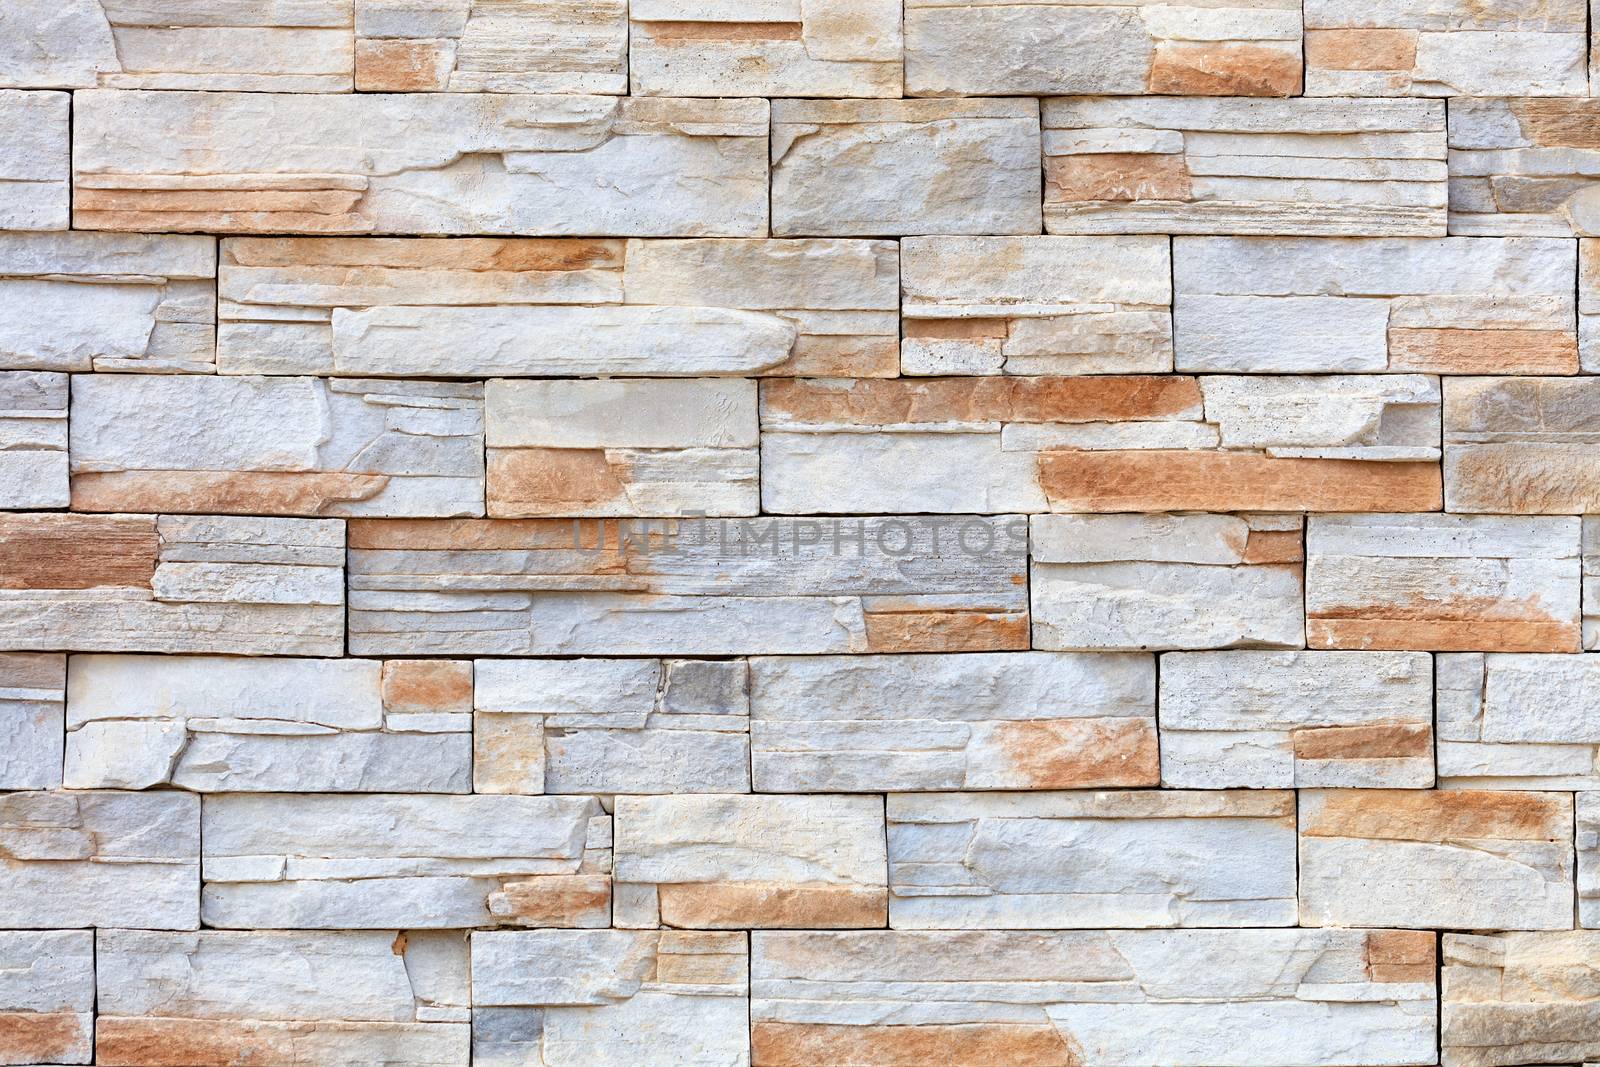 Wall mosaic made of red and beige sandstone tiles by Sergii